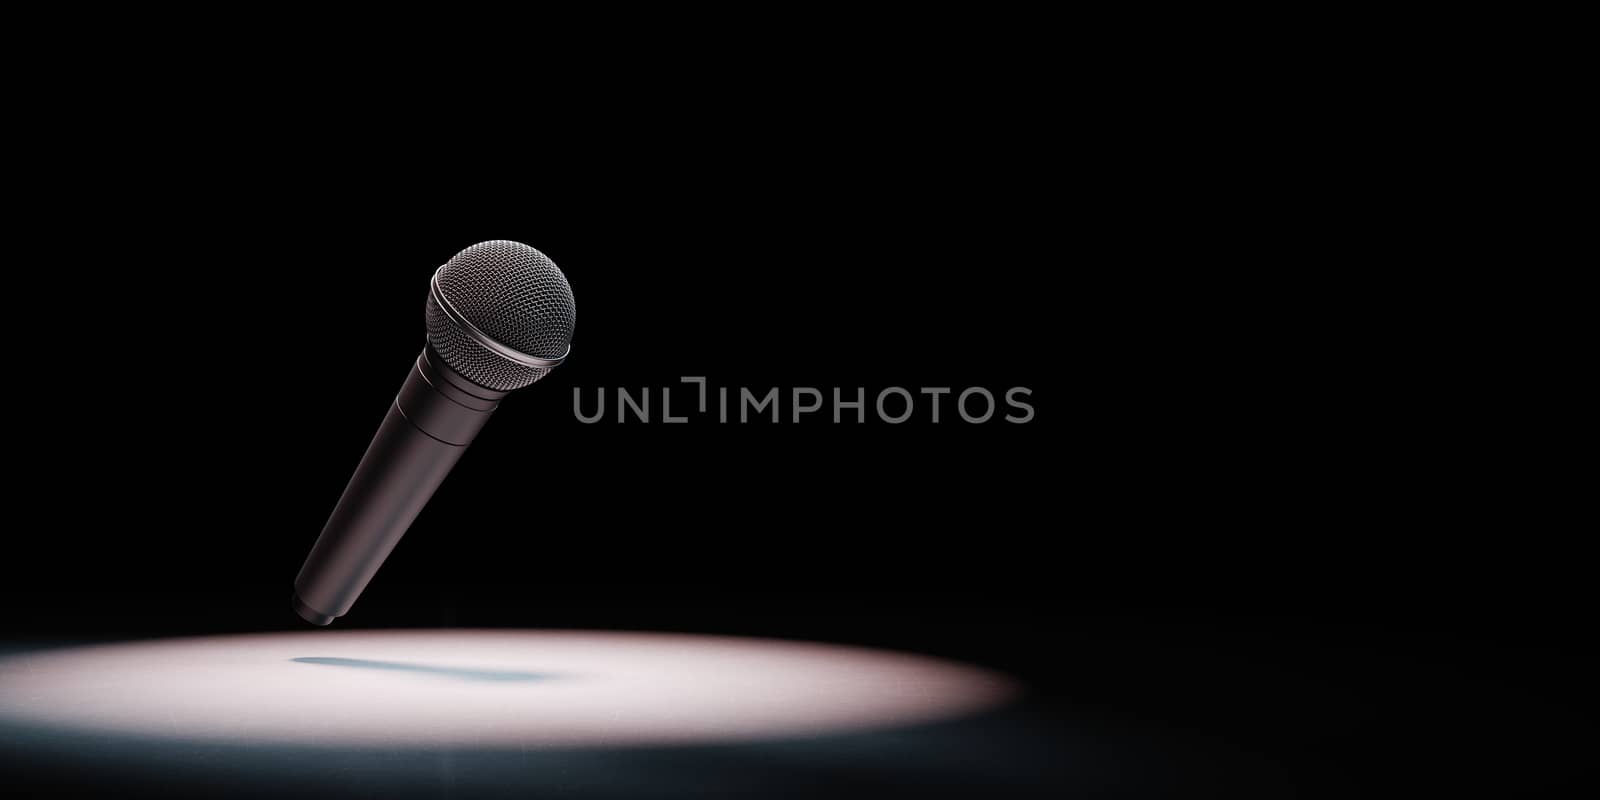 Metallic Microphone Spotlighted on Black Background 3D Illustration by make